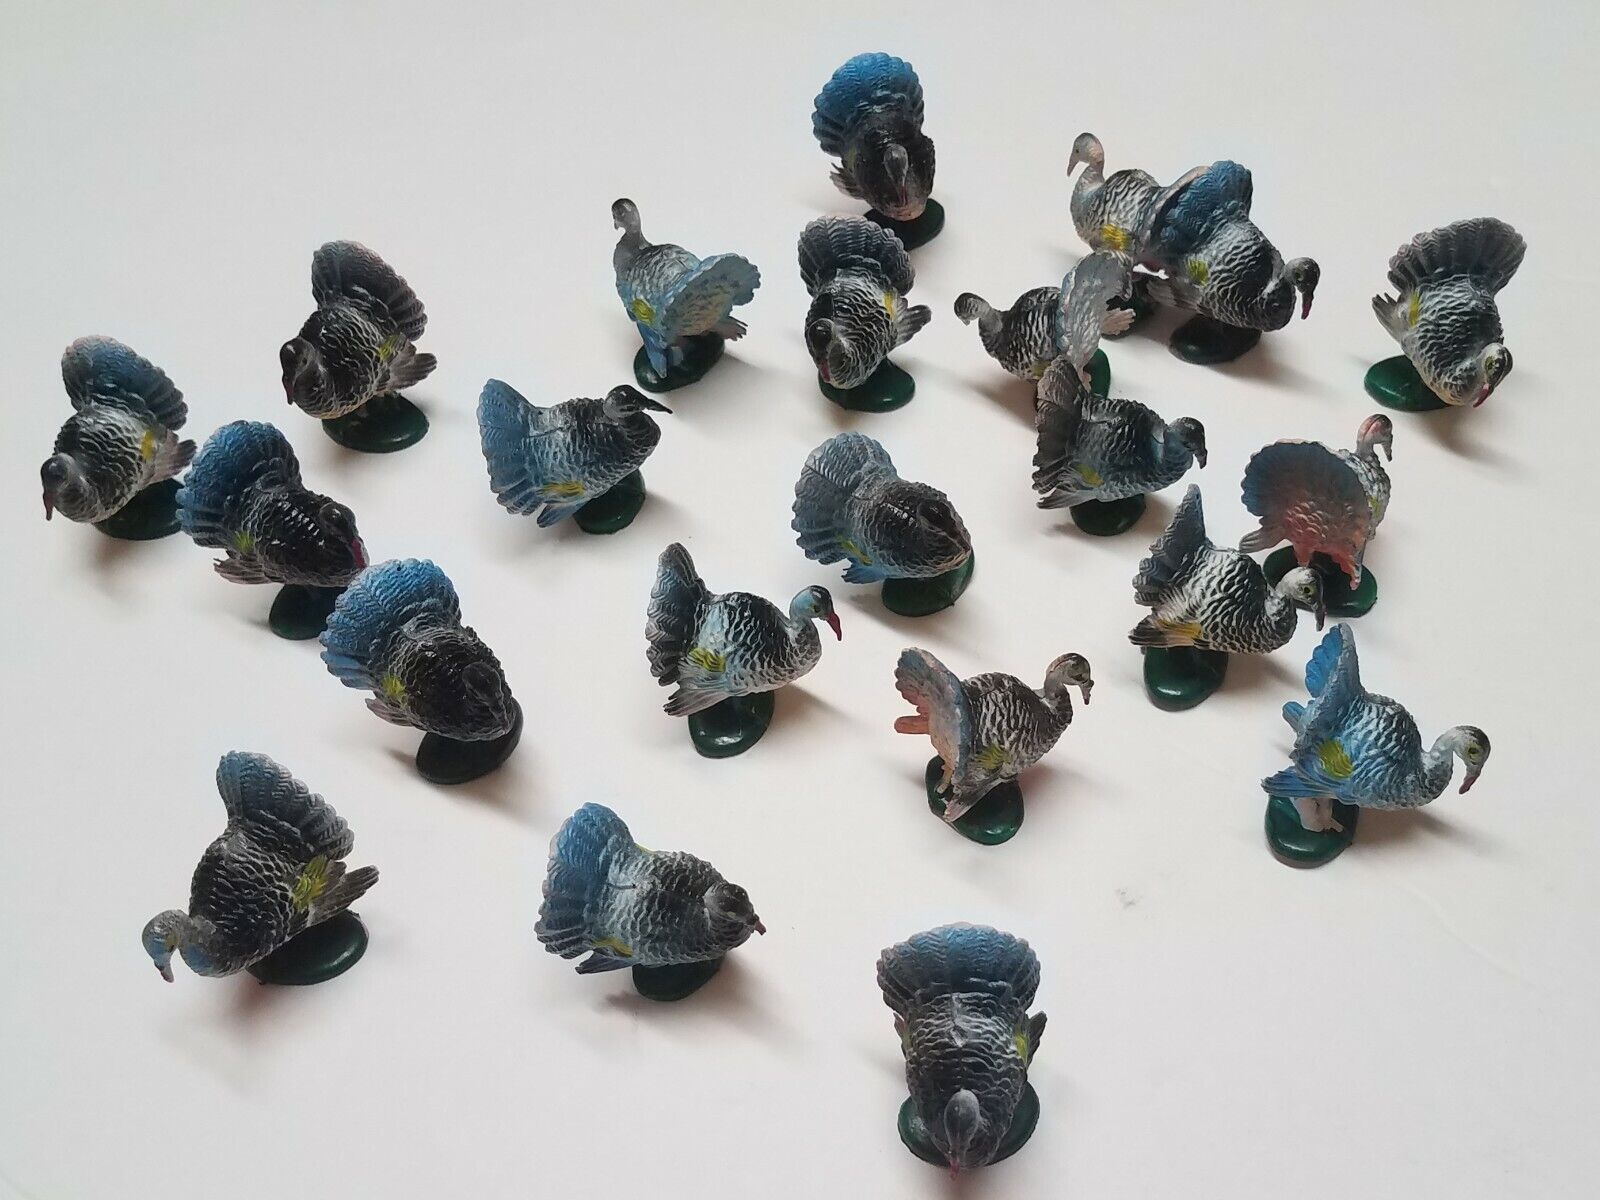 Vintage Miniature Turkeys - Hand Painted Figurines - 12 Pieces *For Thanksgiving